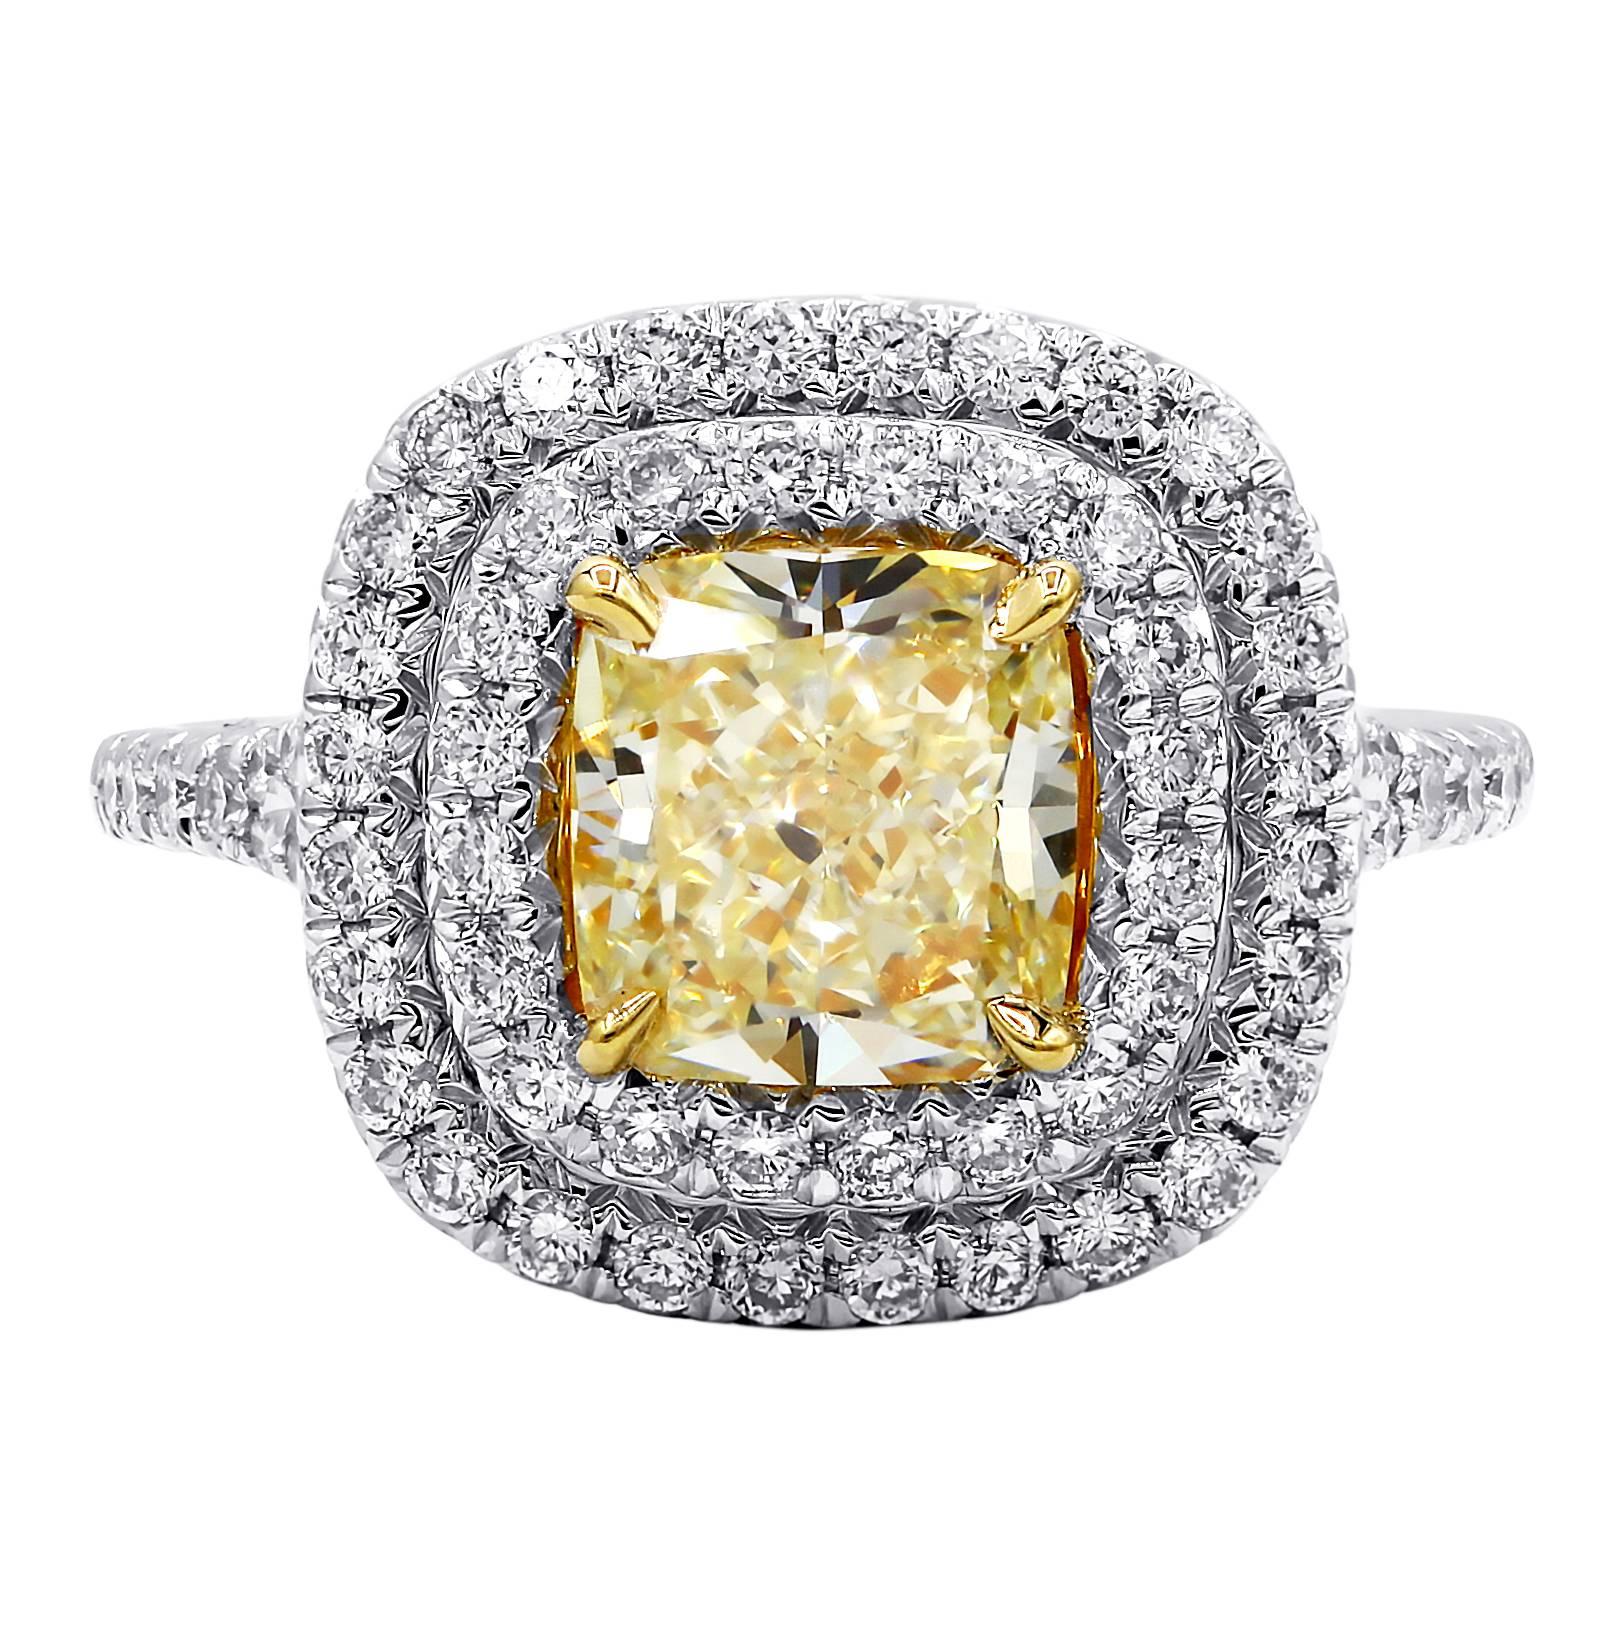 GIA Certified 2.00 Carat Fancy Yellow Diamond Ring For Sale